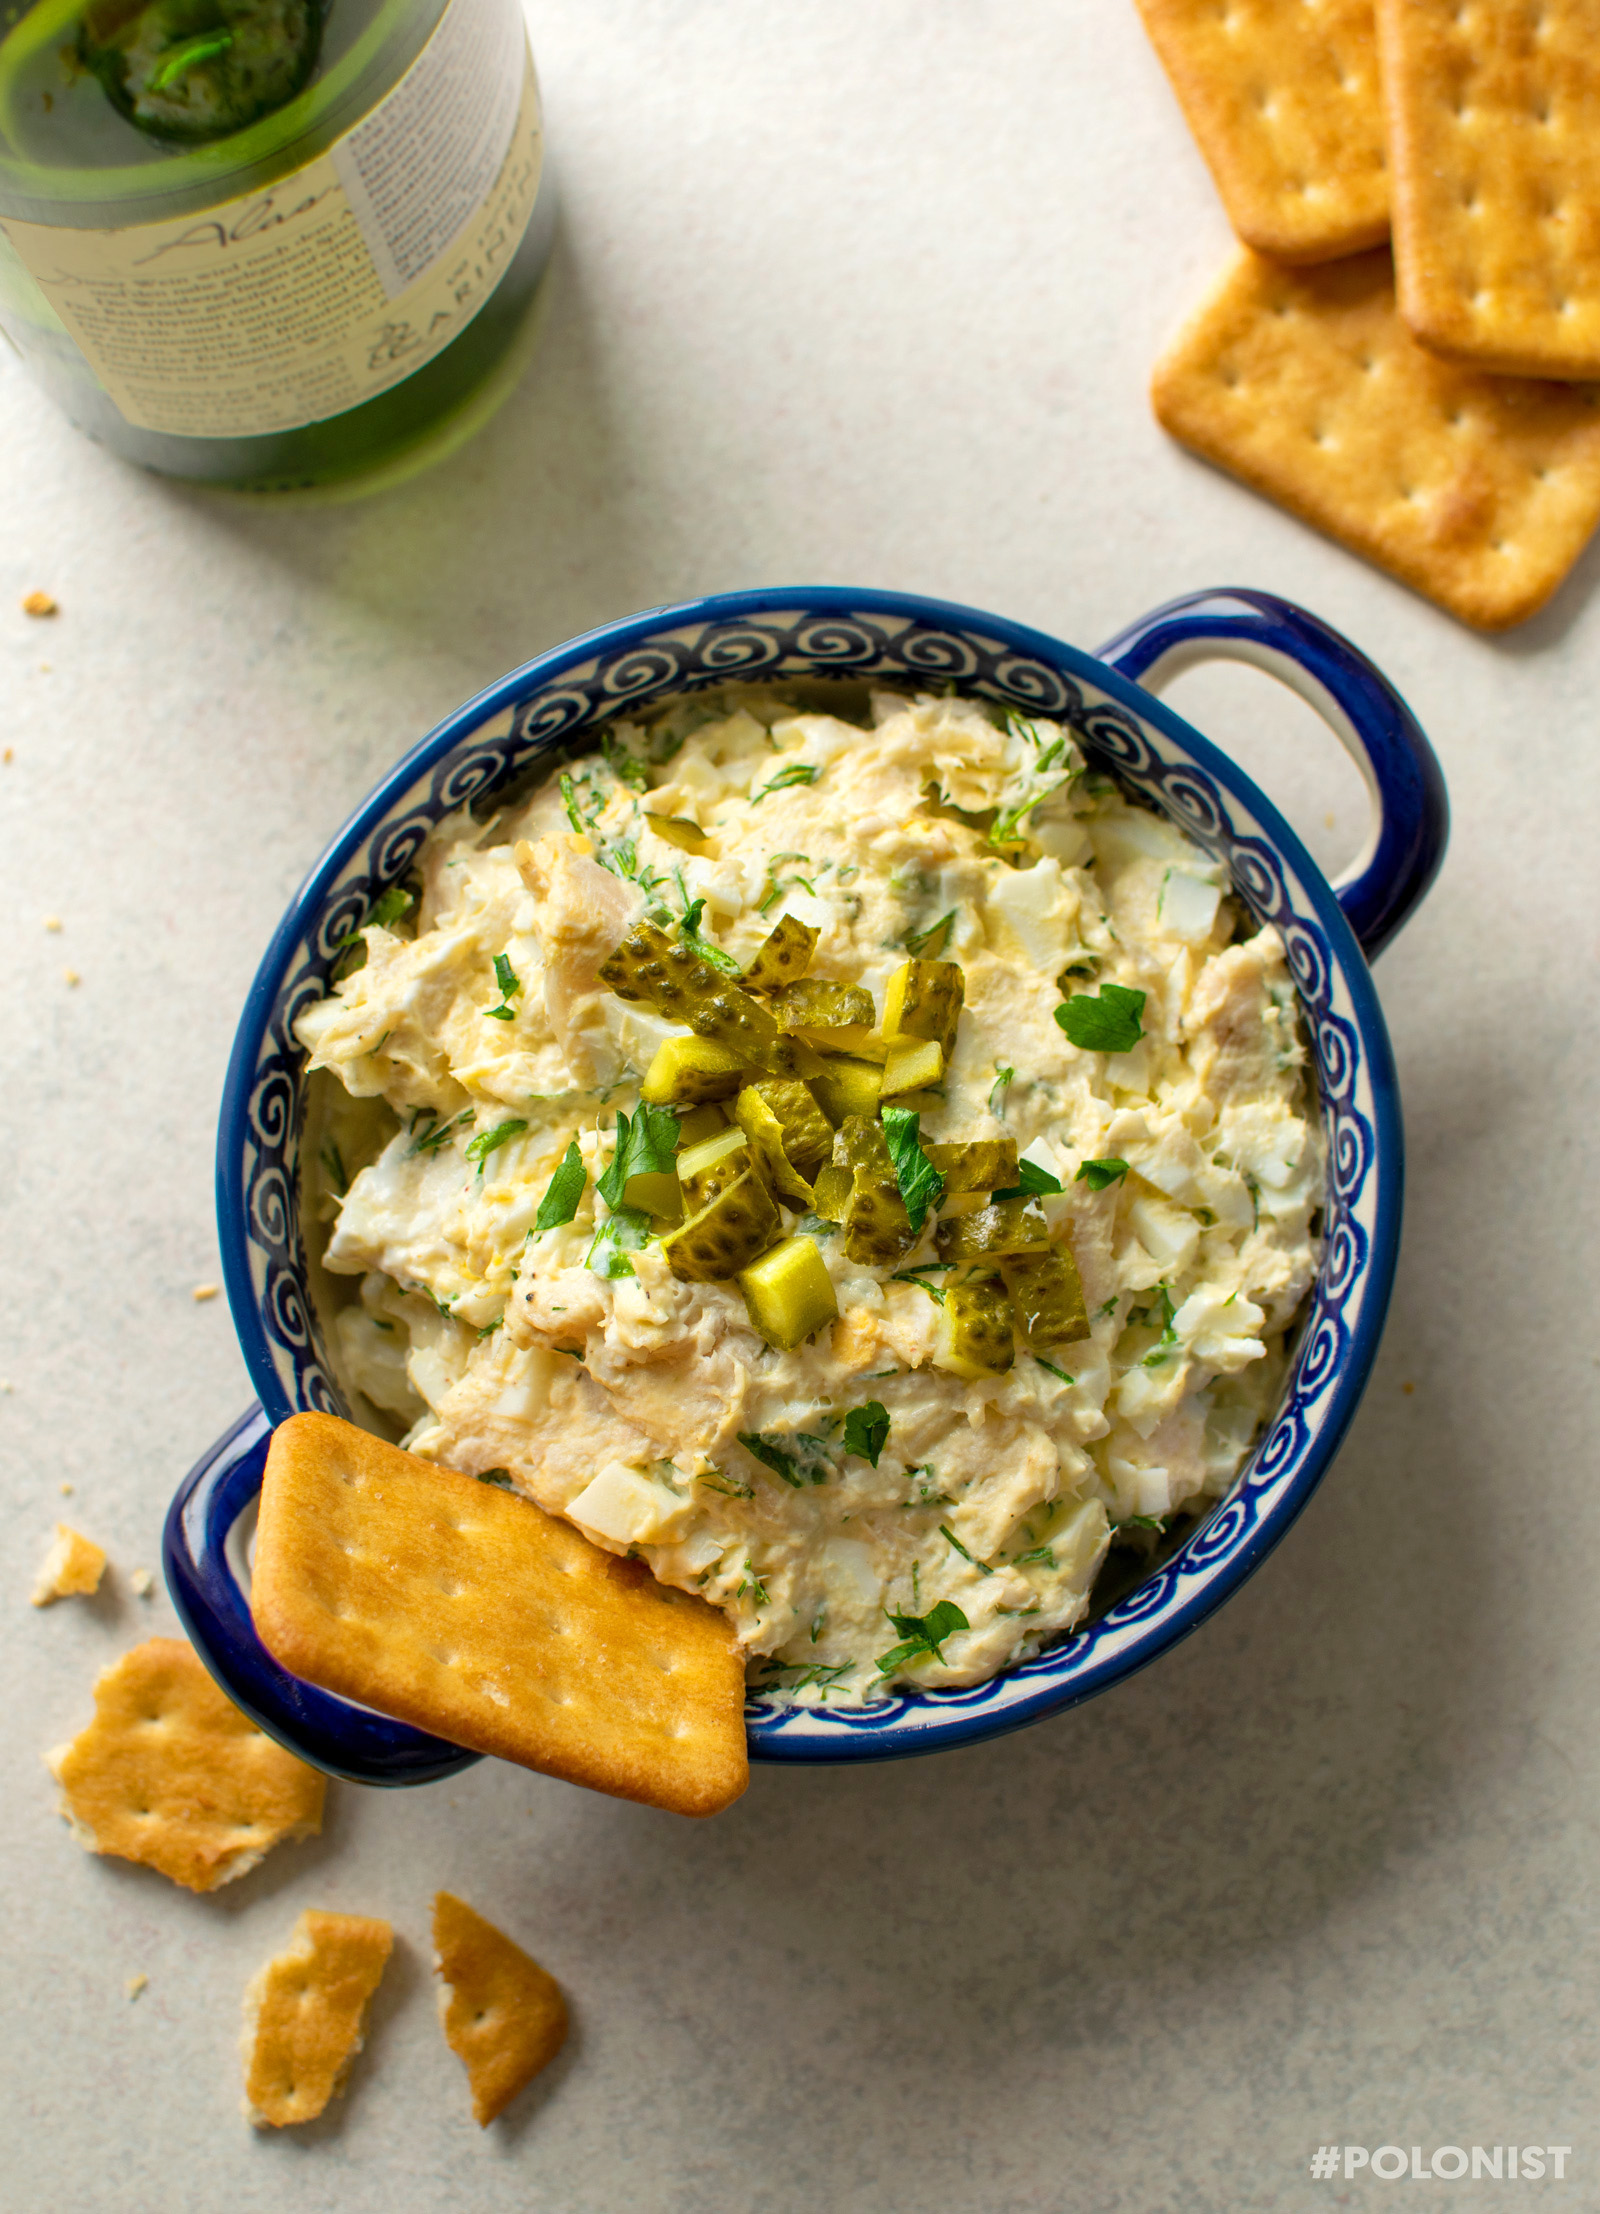 Spicy Smoked Trout Dip - Low-Carb, Grain-Free, Keto